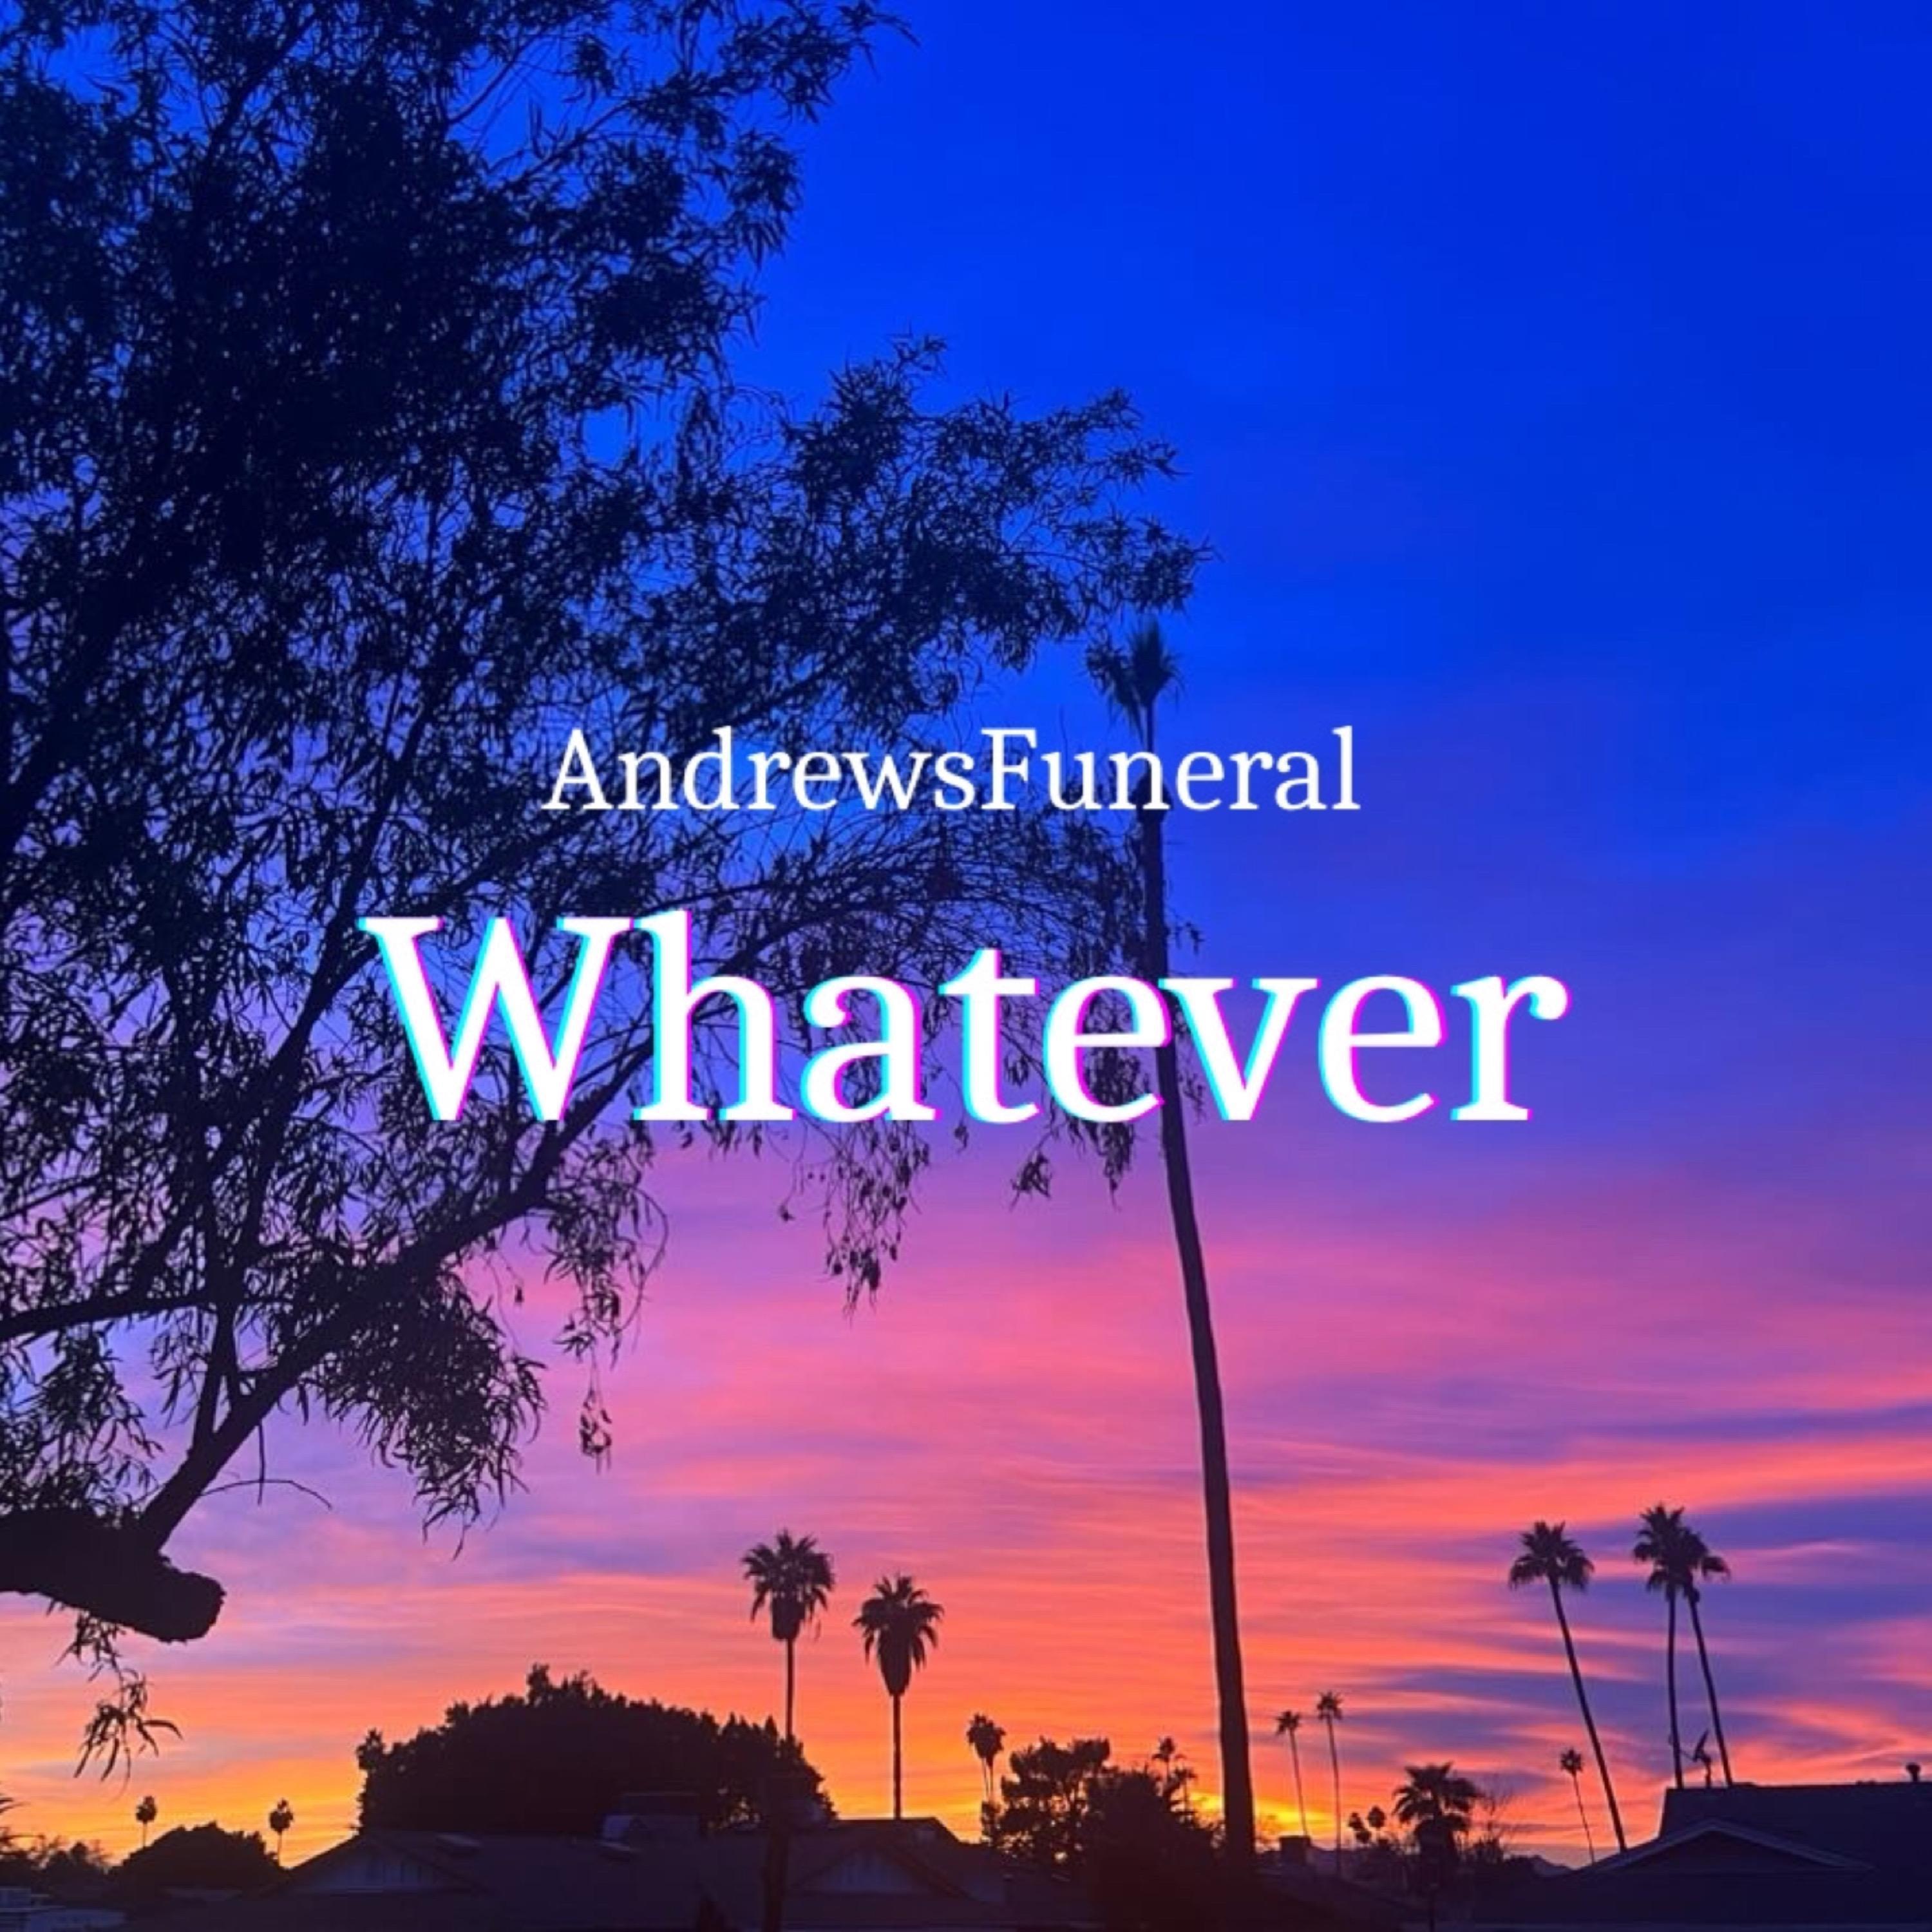 AndrewsFuneral - Perfect